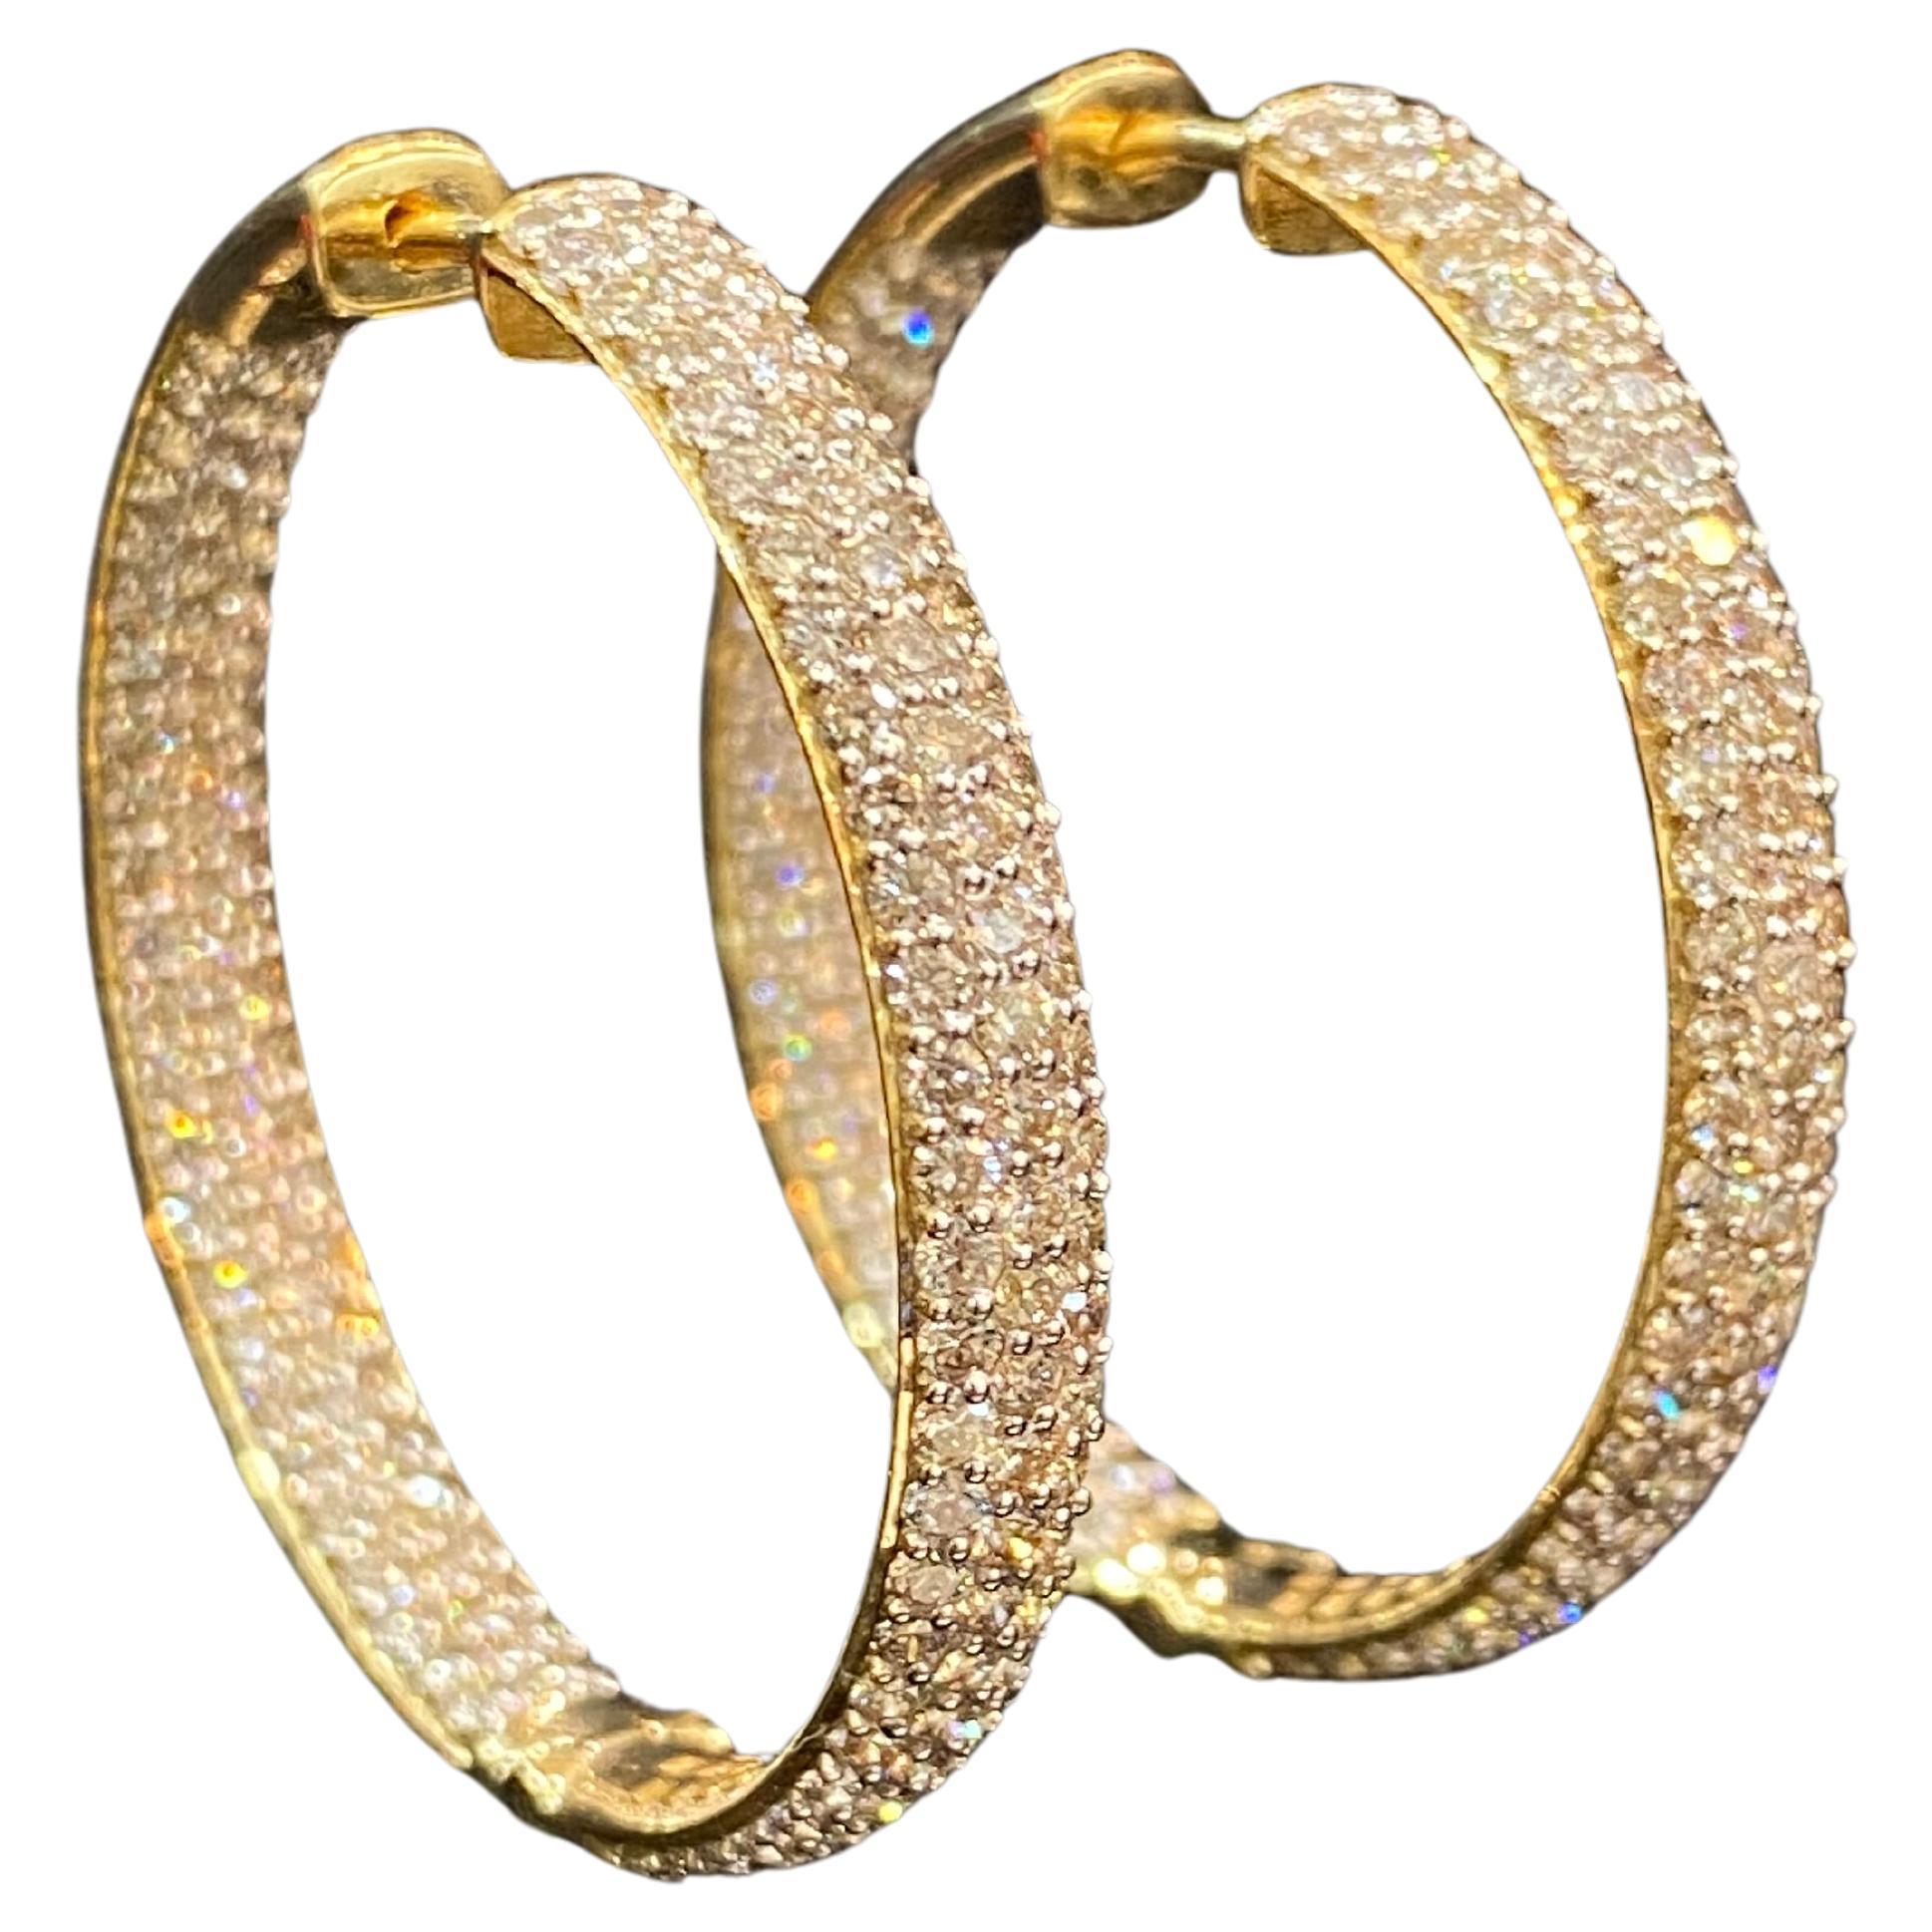 Pave 5.72 Cts F/VS1 Round Brilliant Diamonds 3-Row Hoop Earrings 14K Yellow Gold